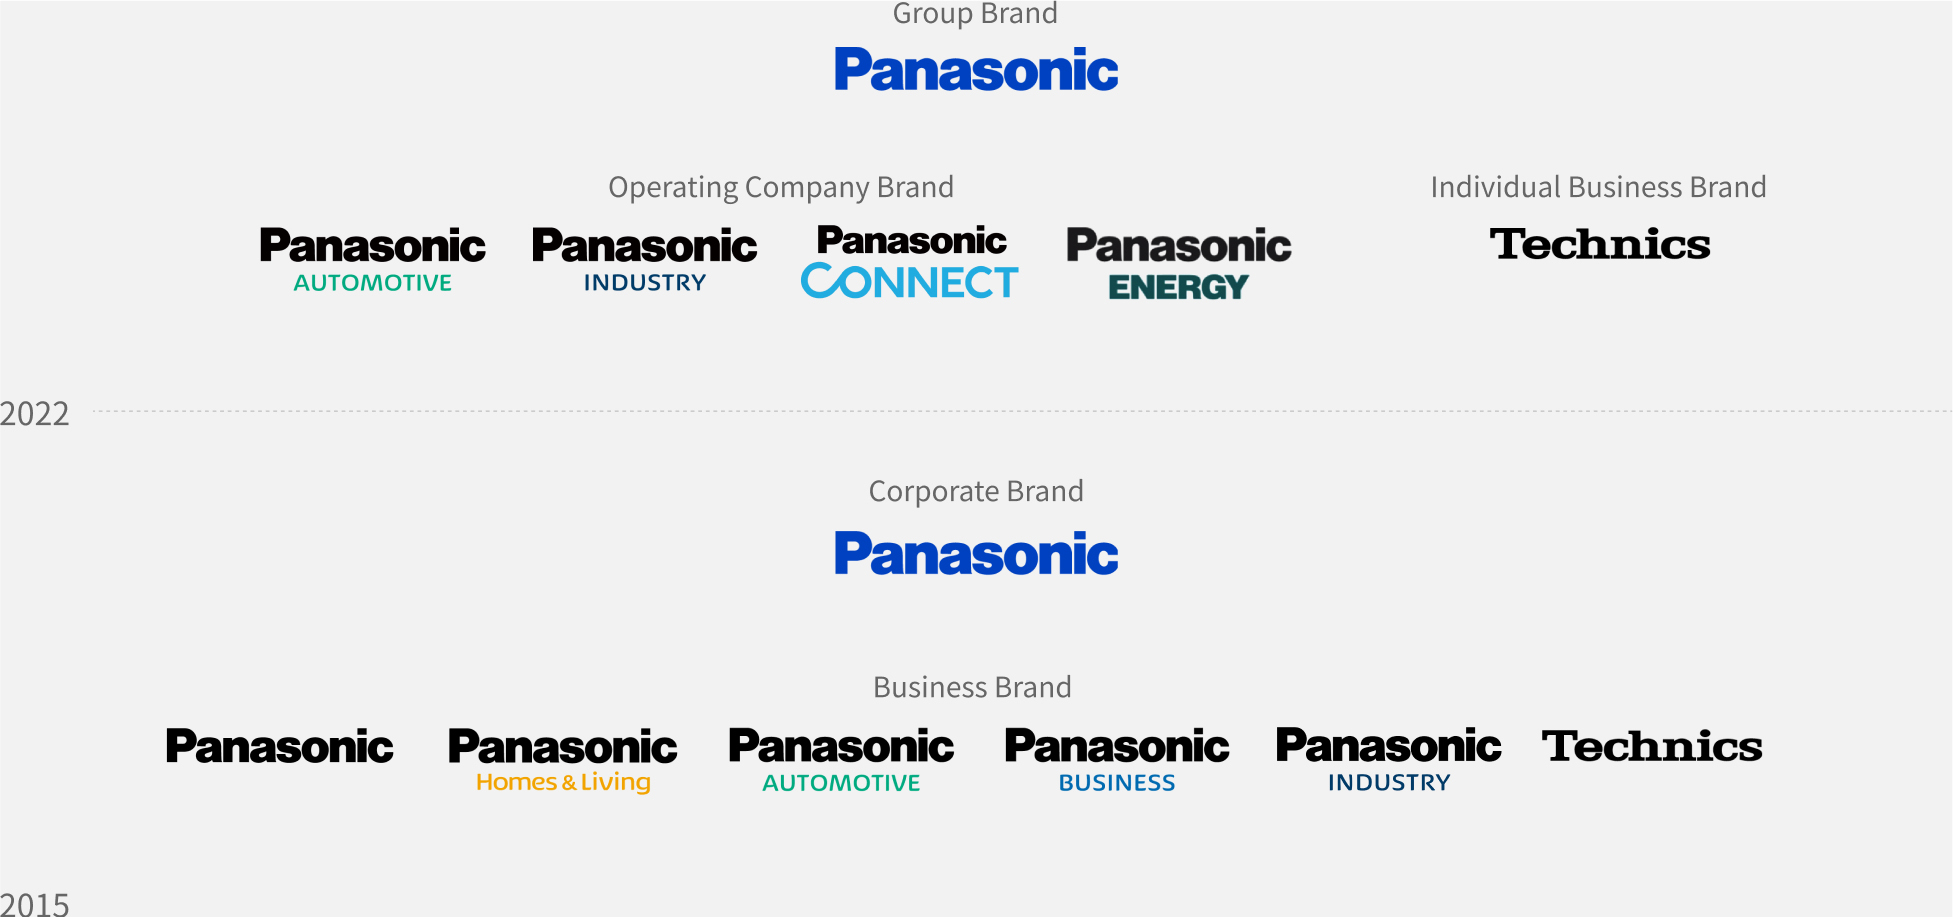 2022: "Panasonic" as our group brand, and "Panasonic AUTOMOTIVE," "Panasonic INDUSTRY," "Panasonic CONNECT," and "Panasonic ENERGY," as our operating Company brands, and also "Technics" as our individual Business brand. 2015: "Panasonic" with blue color as our corporate brand. "Panasonic" with black color, "Panasonic AUTOMOTIVE," "Panasonic BUSINESS," "Panasonic Homes & Living," "Panasonic INDUSTRY," and "Technics." as our business brands.